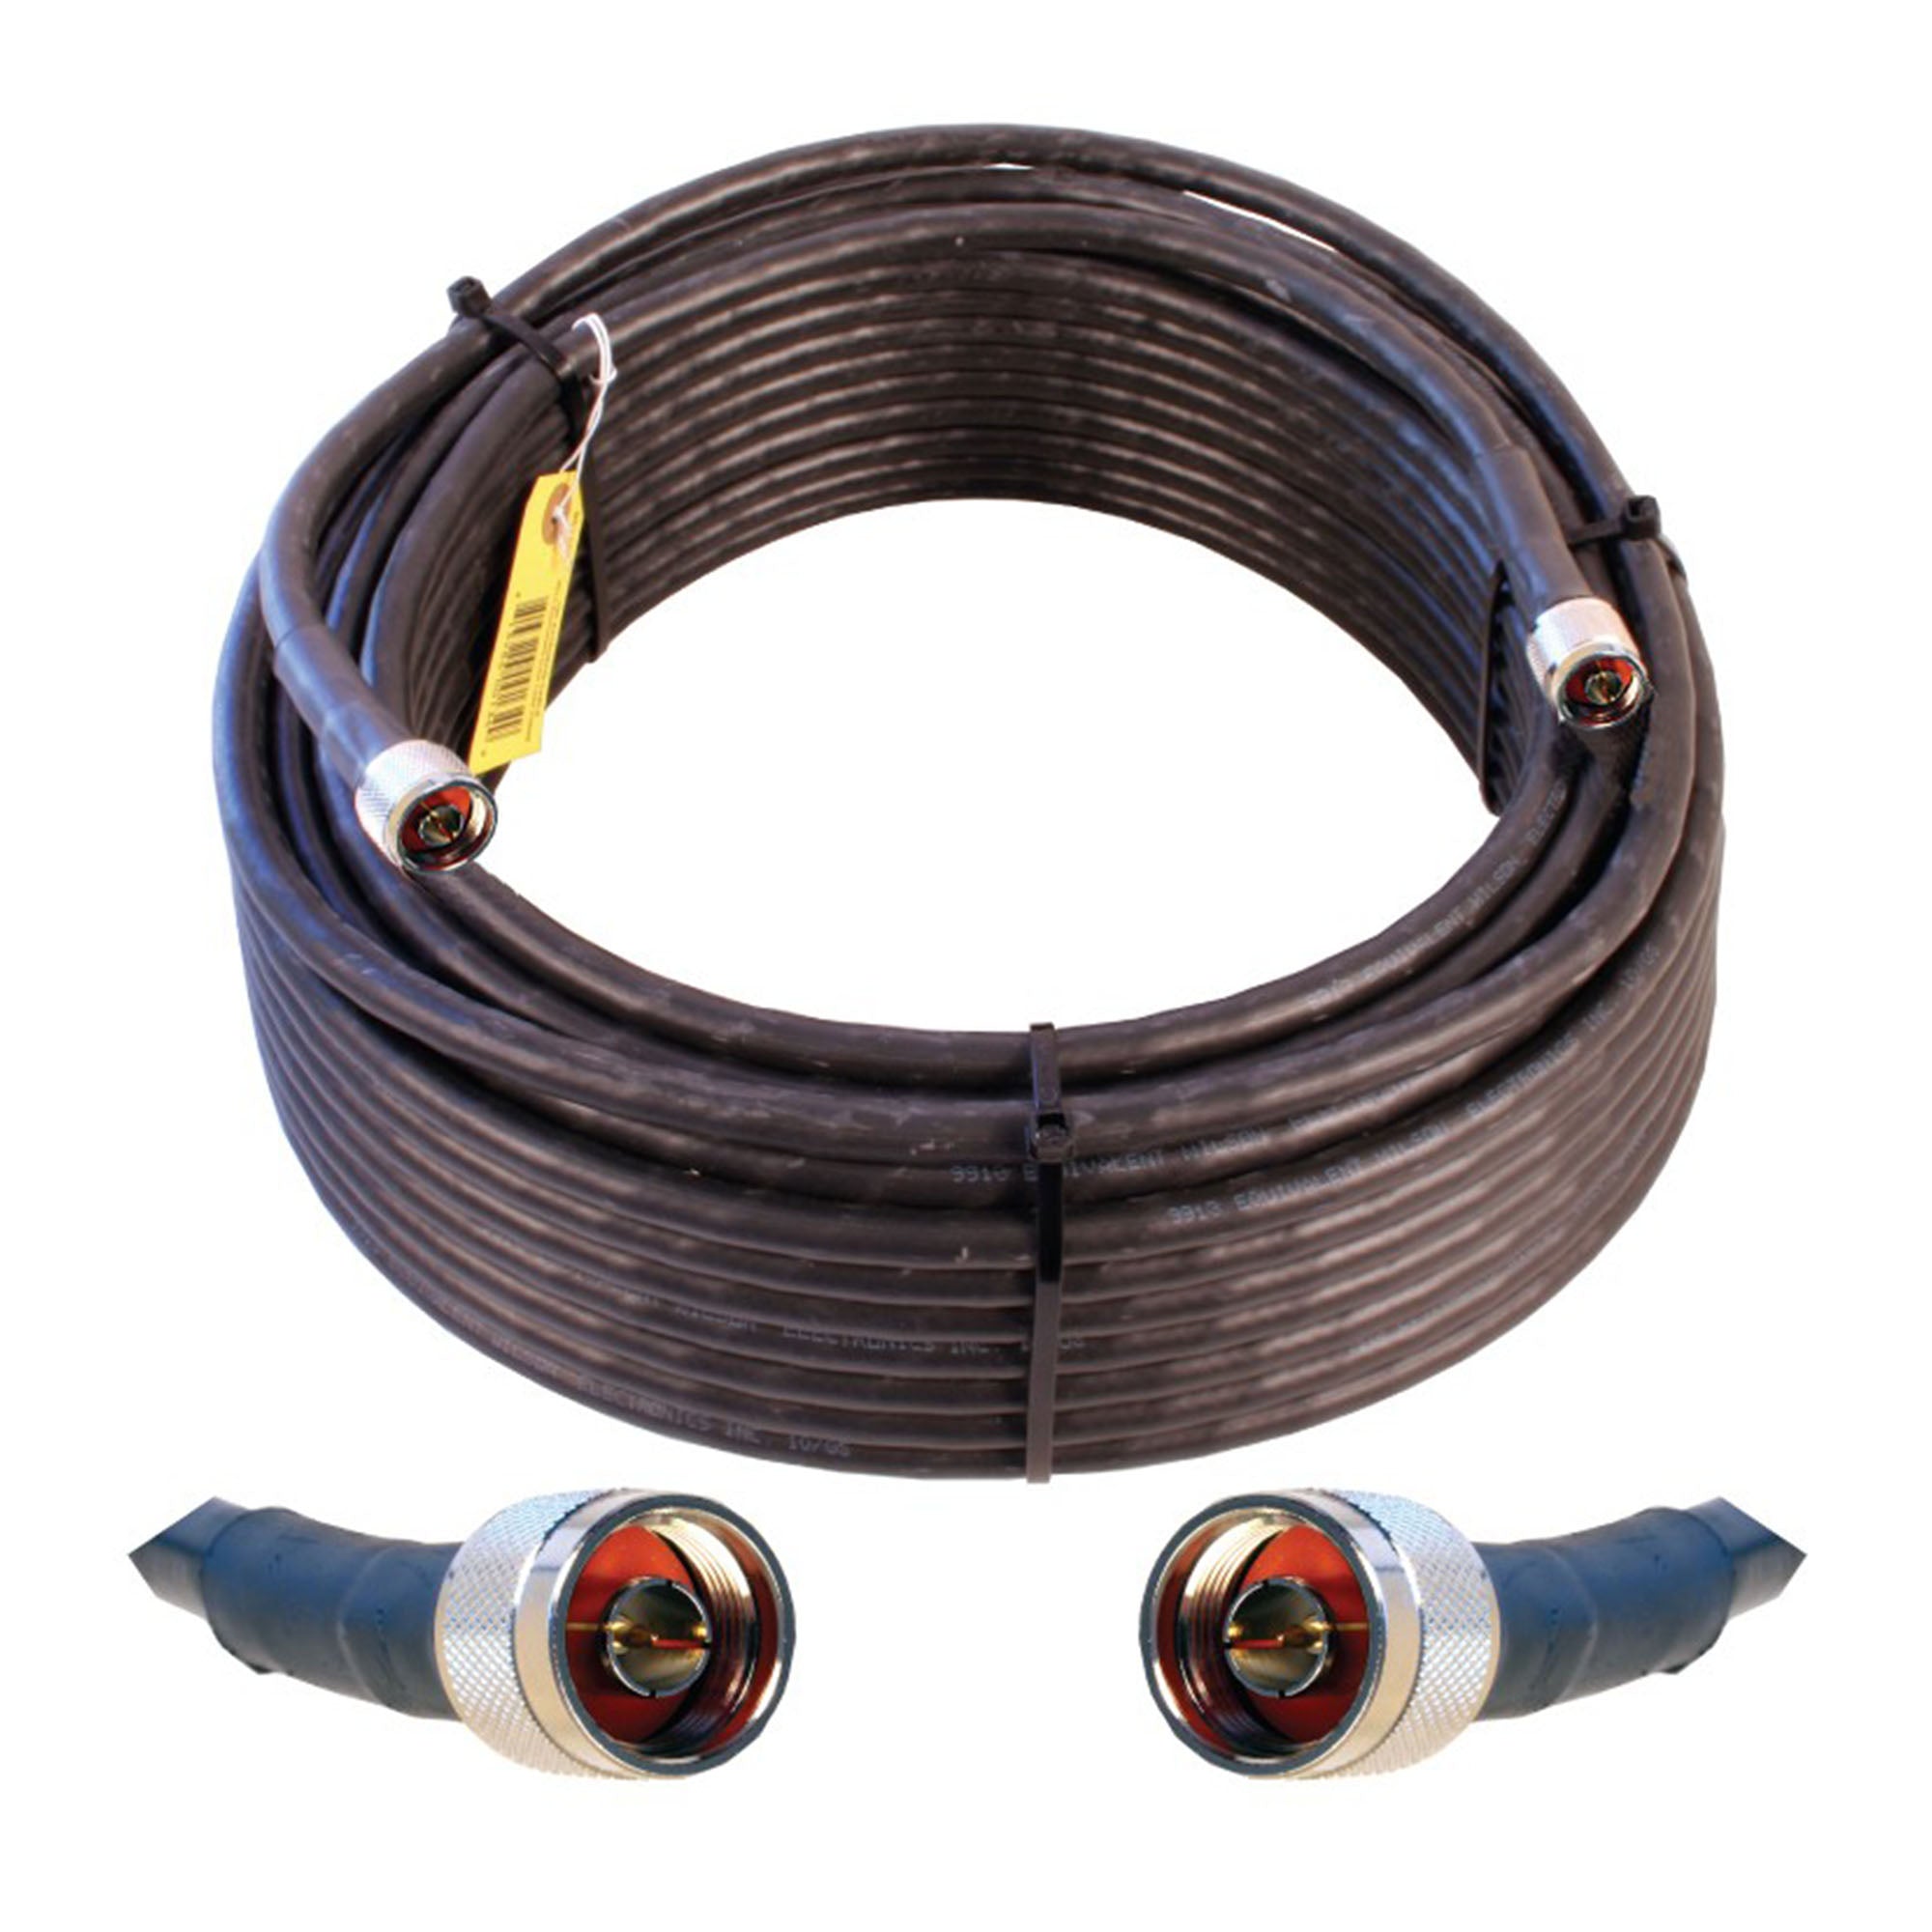 Wilson Electronics Cable 100 ft. LMR400 eqiv. ultra low loss cable (N male - N male ends)